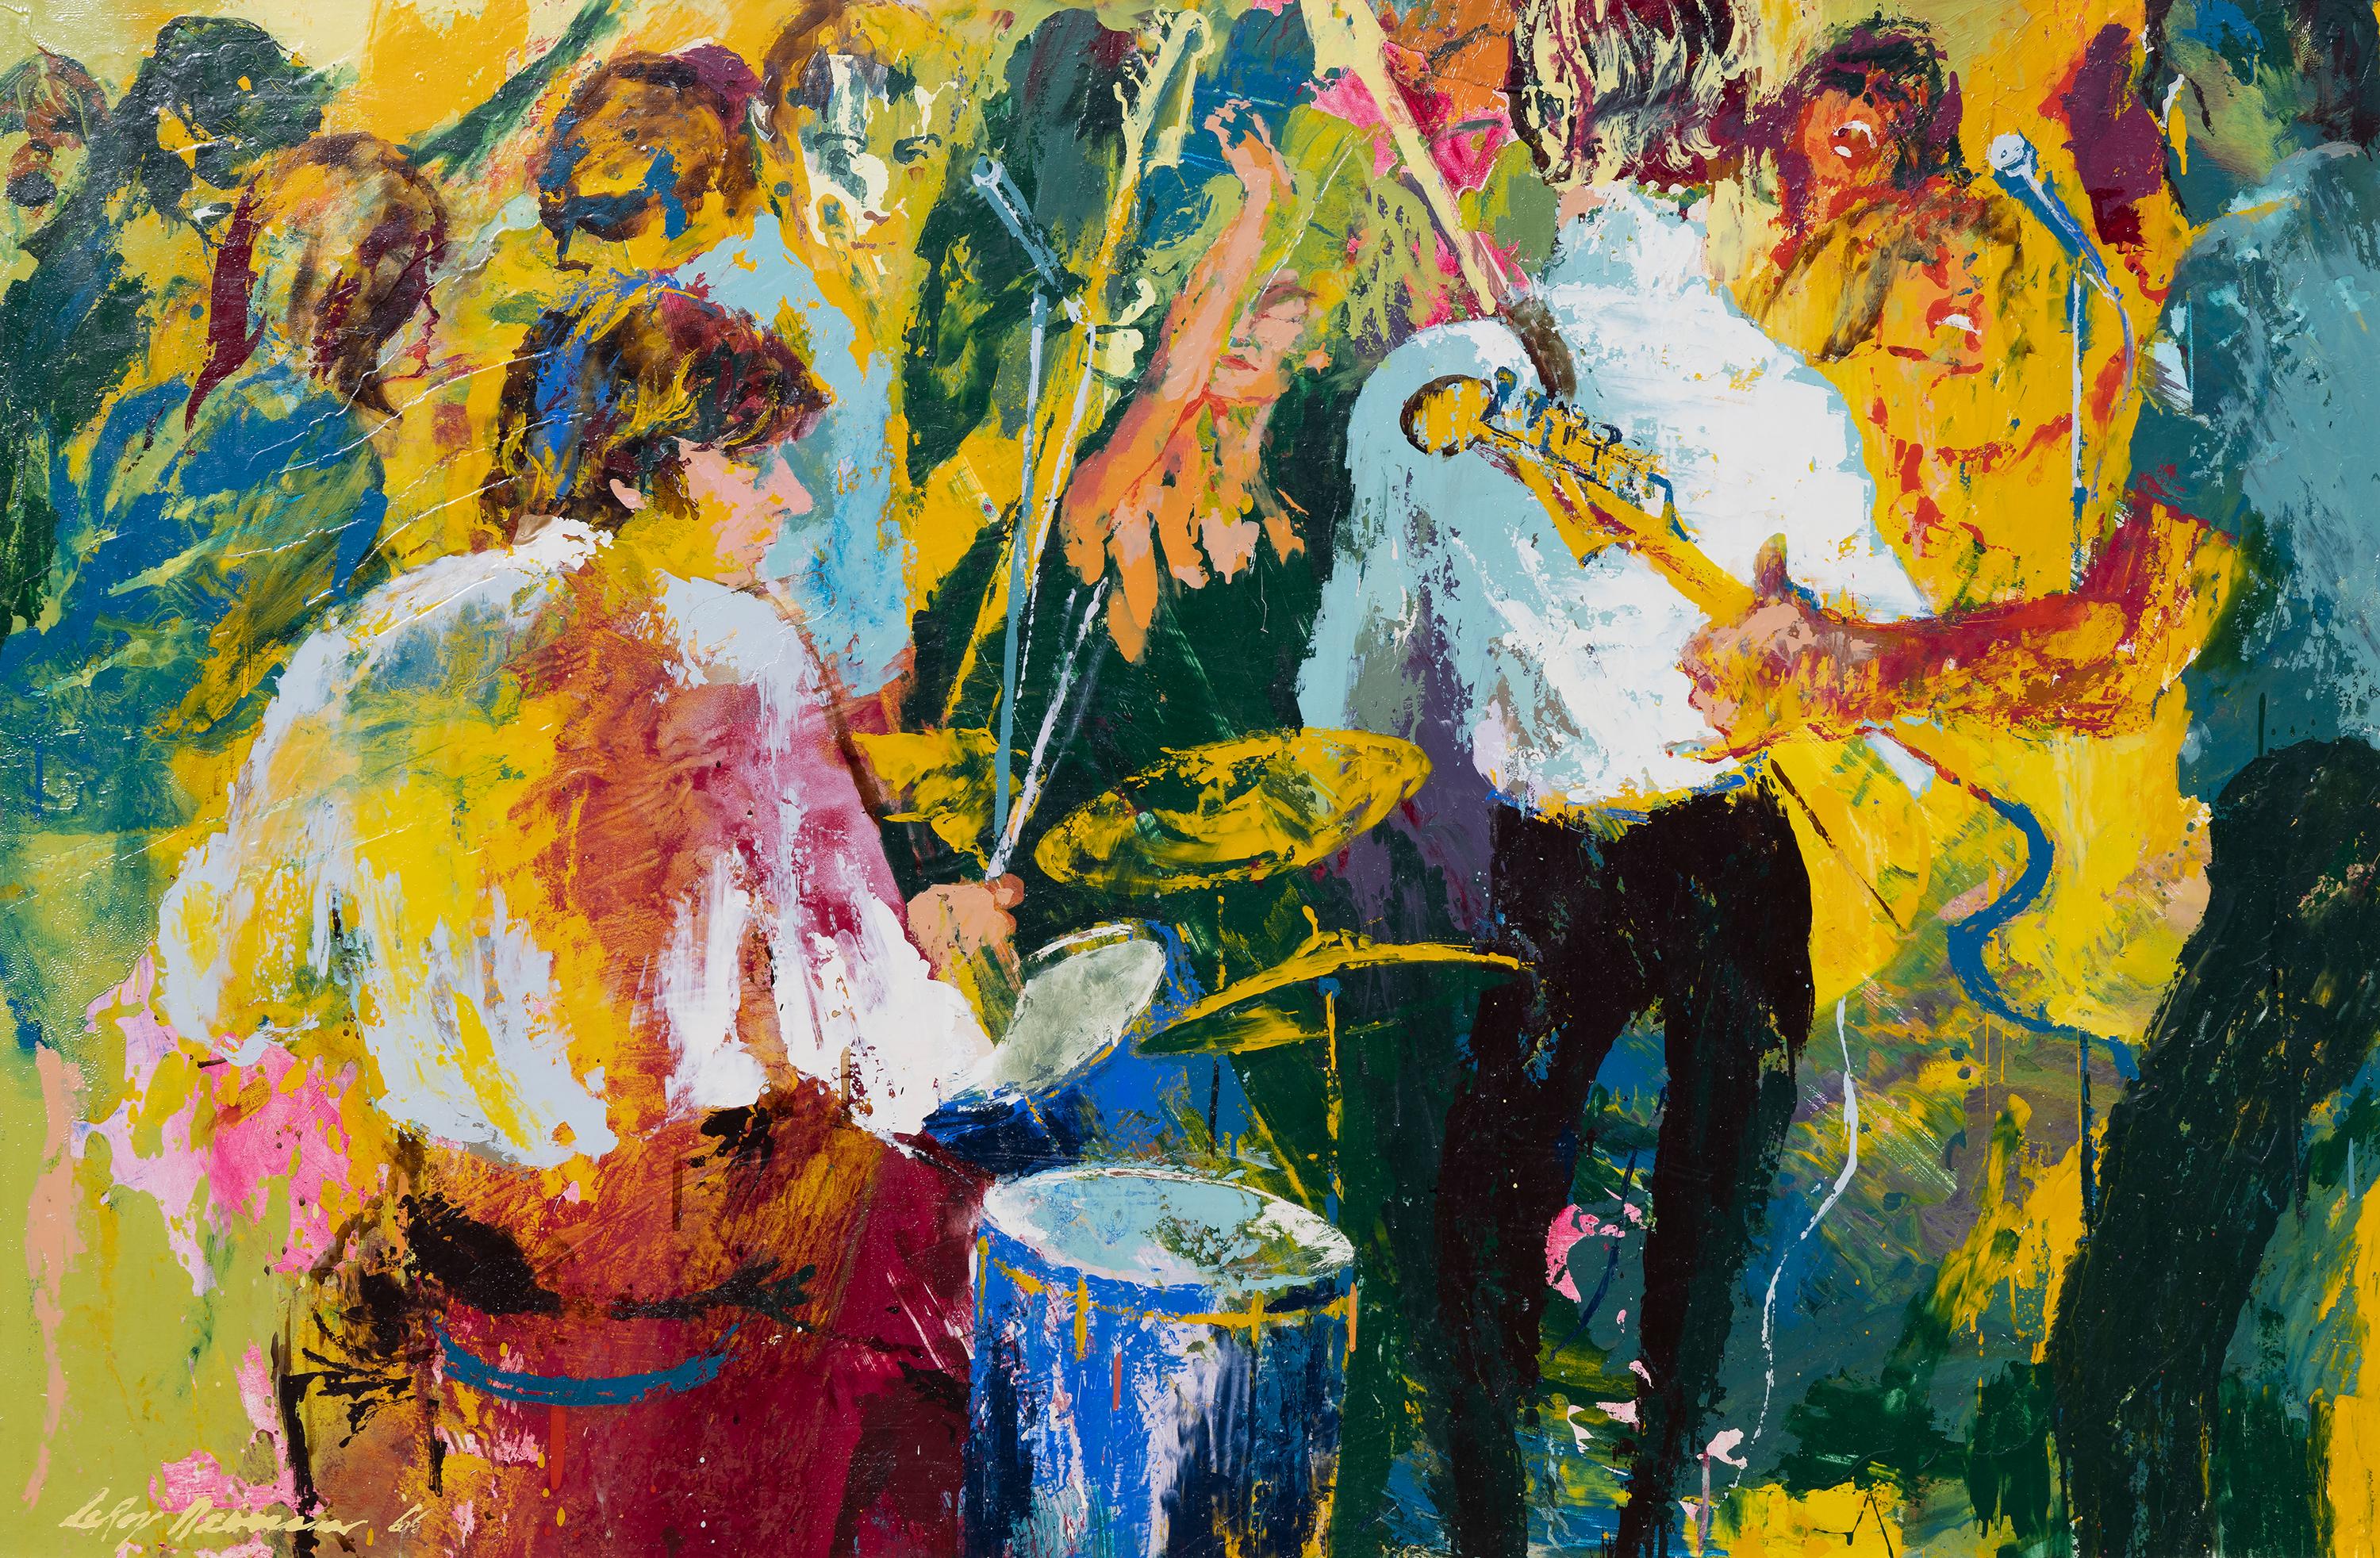 Abstract Painting Leroy Neiman - Polanski aux tambours du Dolly's